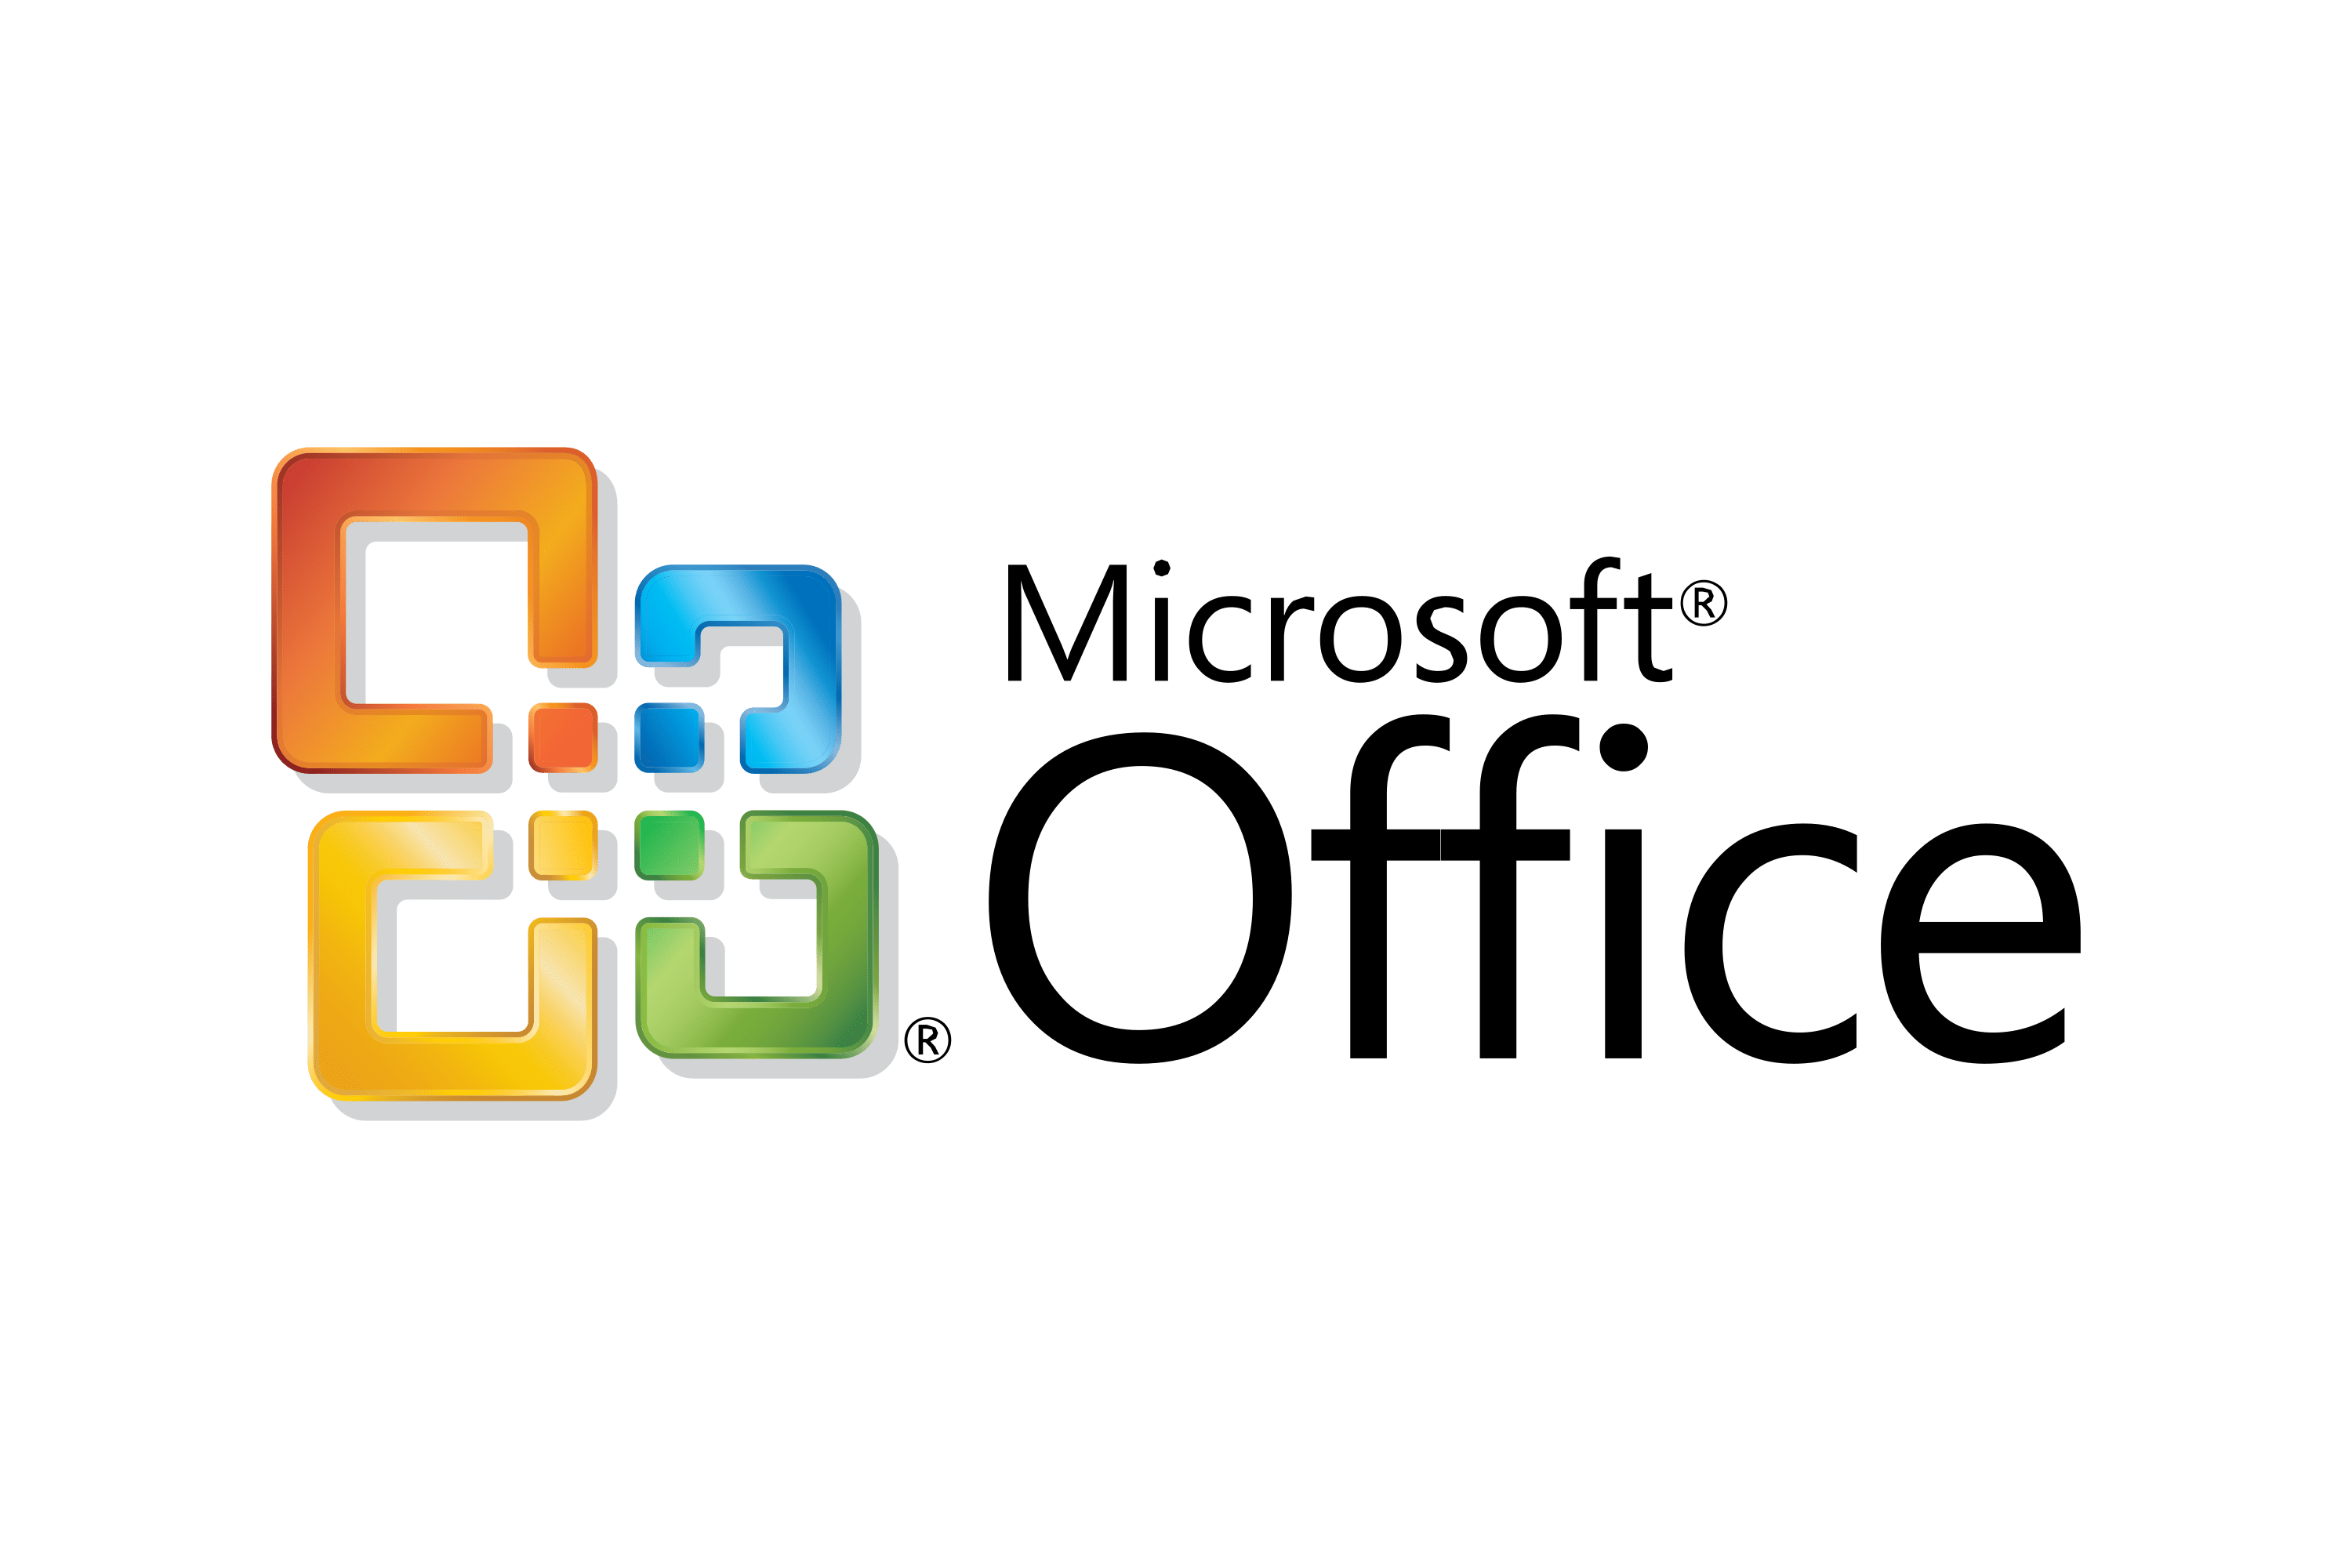 Download Microsoft Office 2007 (Office 12) Logo In Svg Vector Or Png File  Format - Logo.Wine